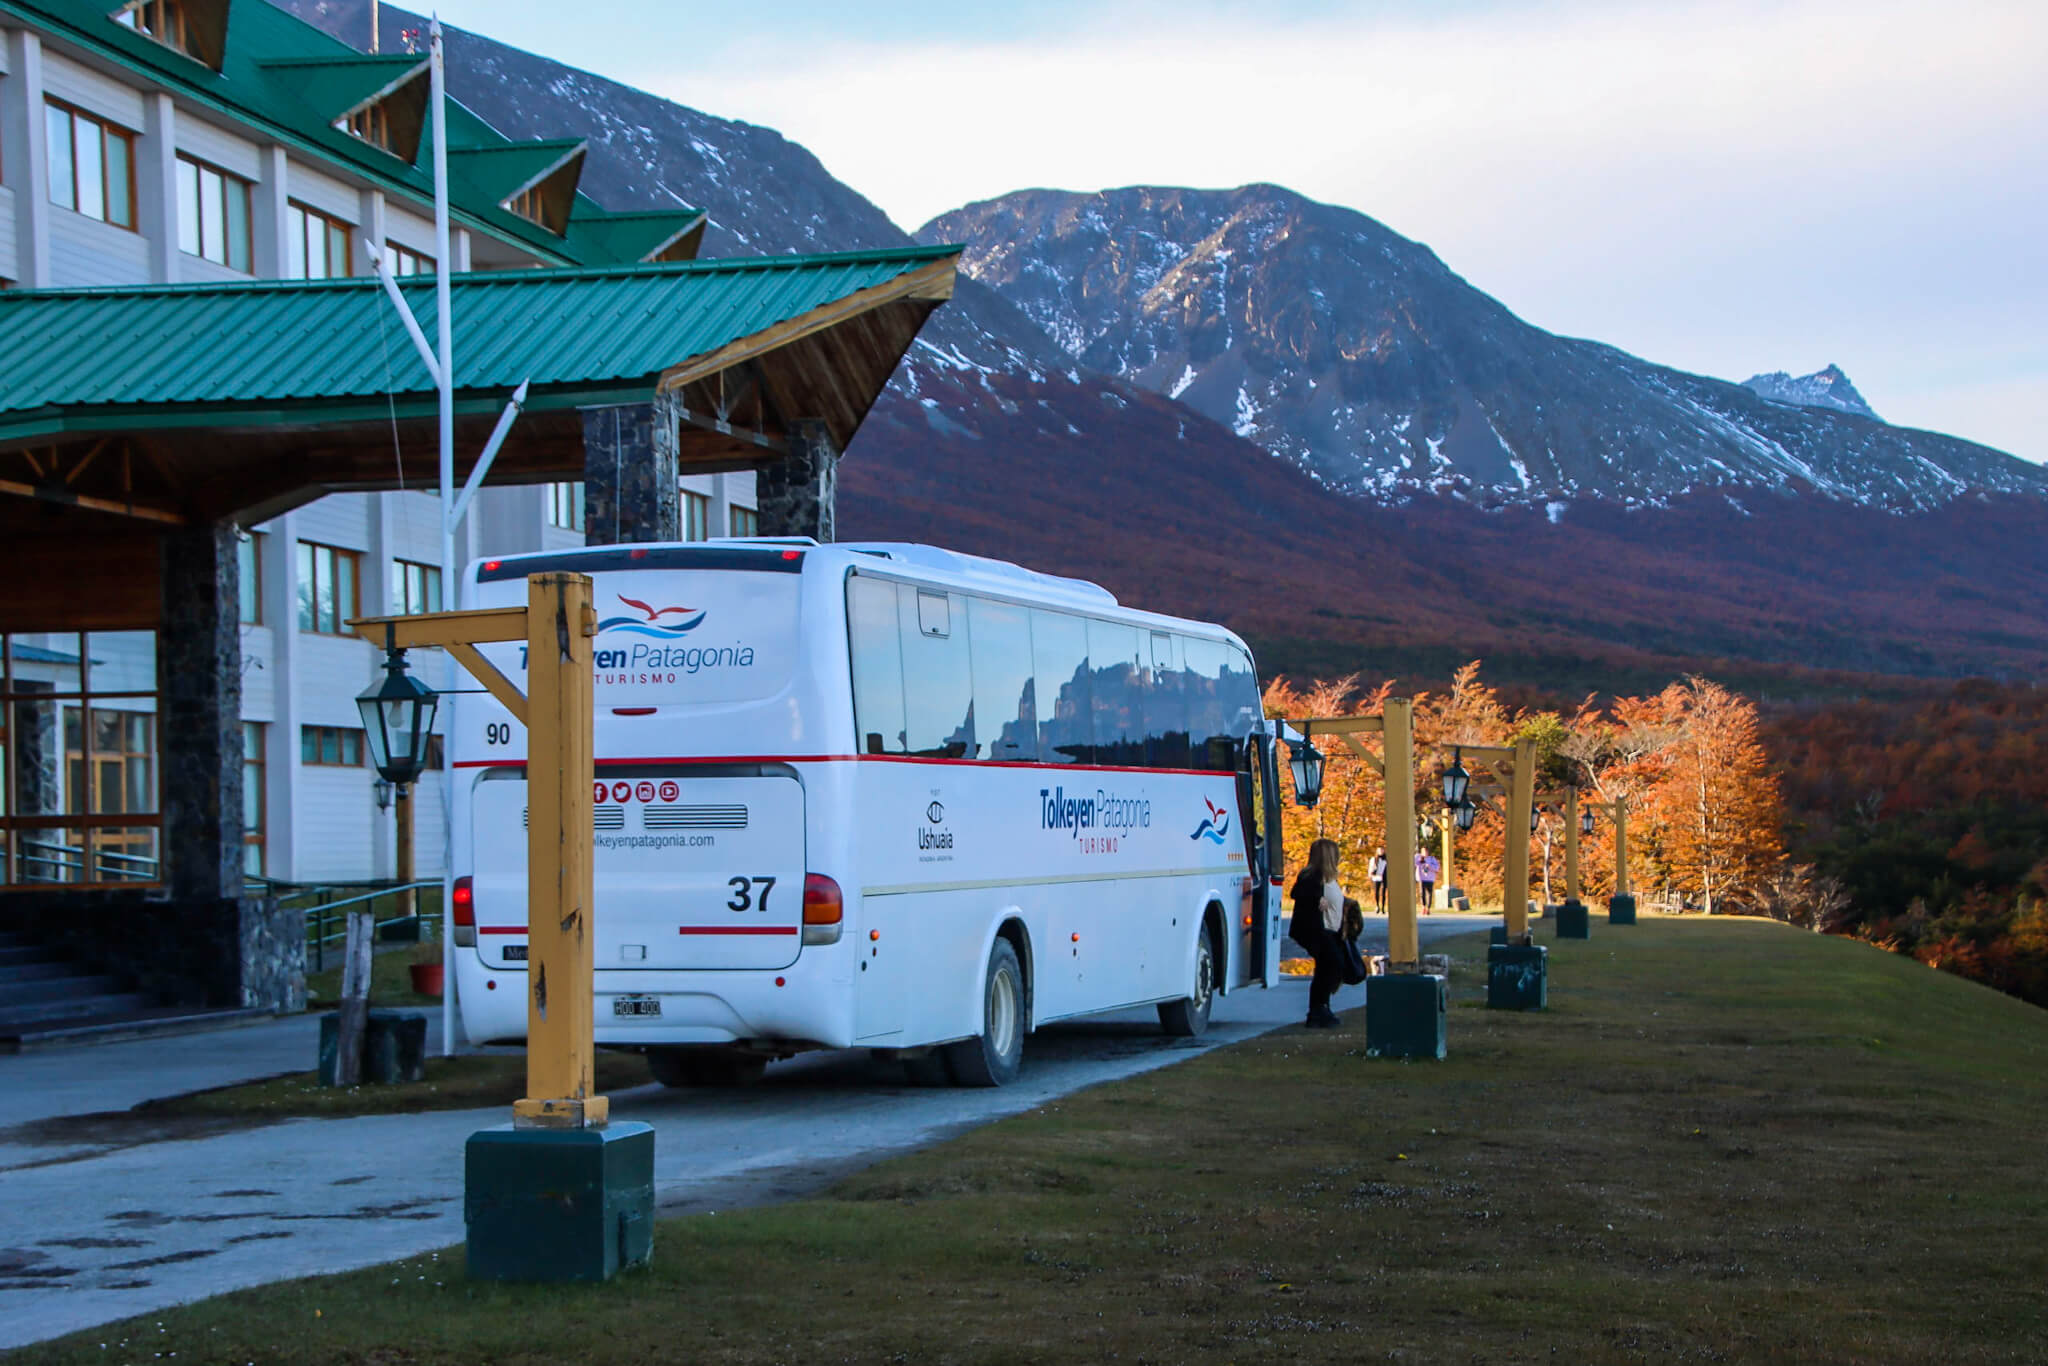 What are the advantages of getting to know Tierra del Fuego with Tolkeyen?